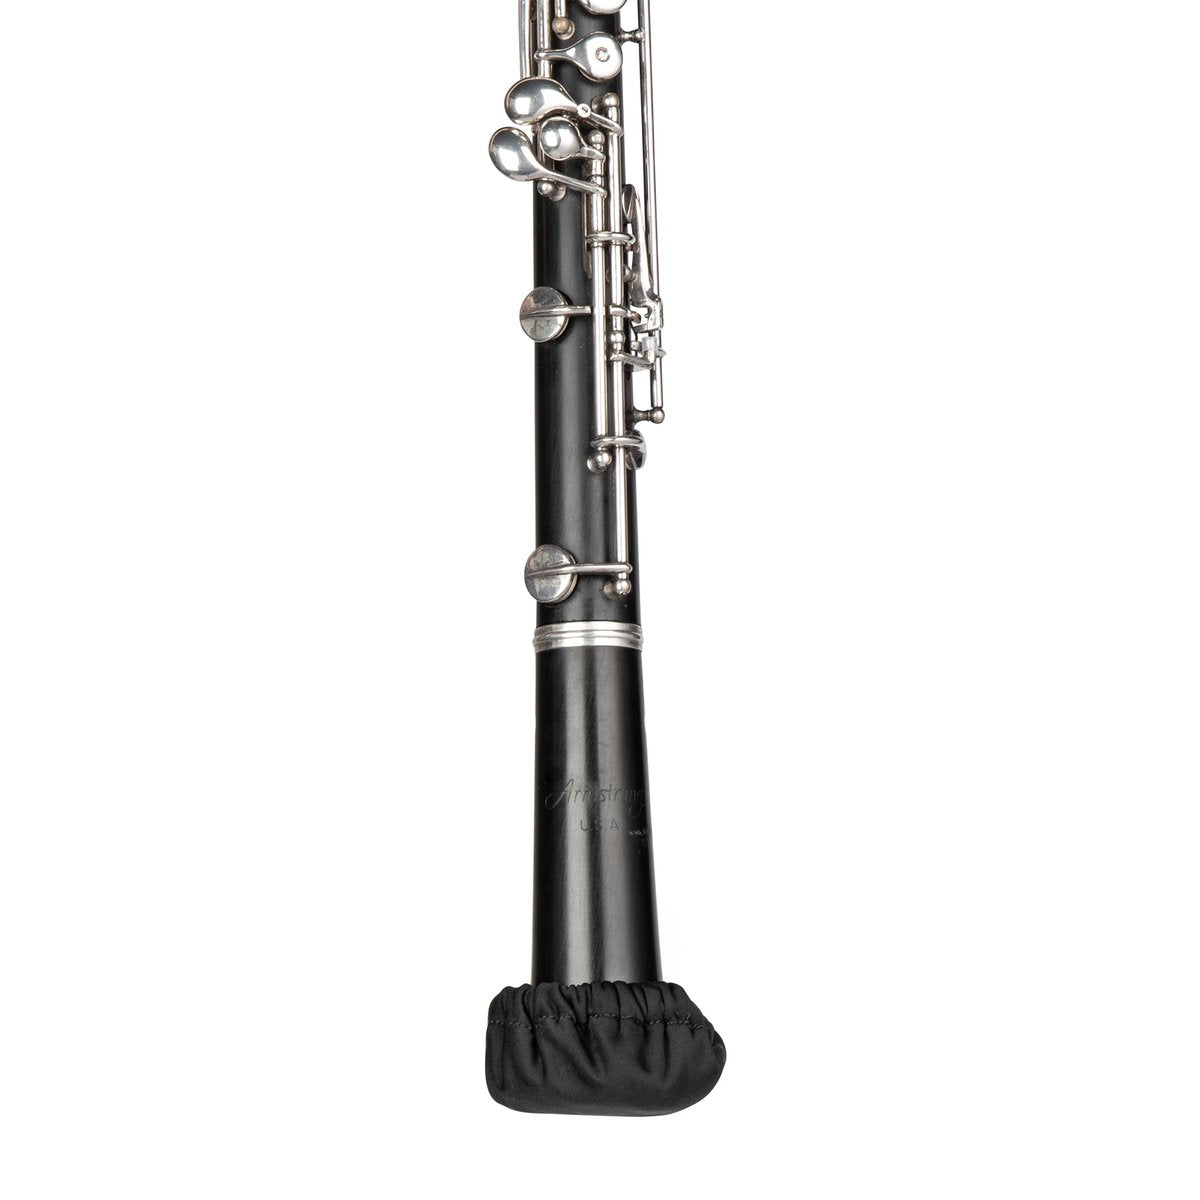 Double-Layer Wind Instrument Cover for Bell Sizes Ranging from 2.5 to 3.5-Inches (Black Color)